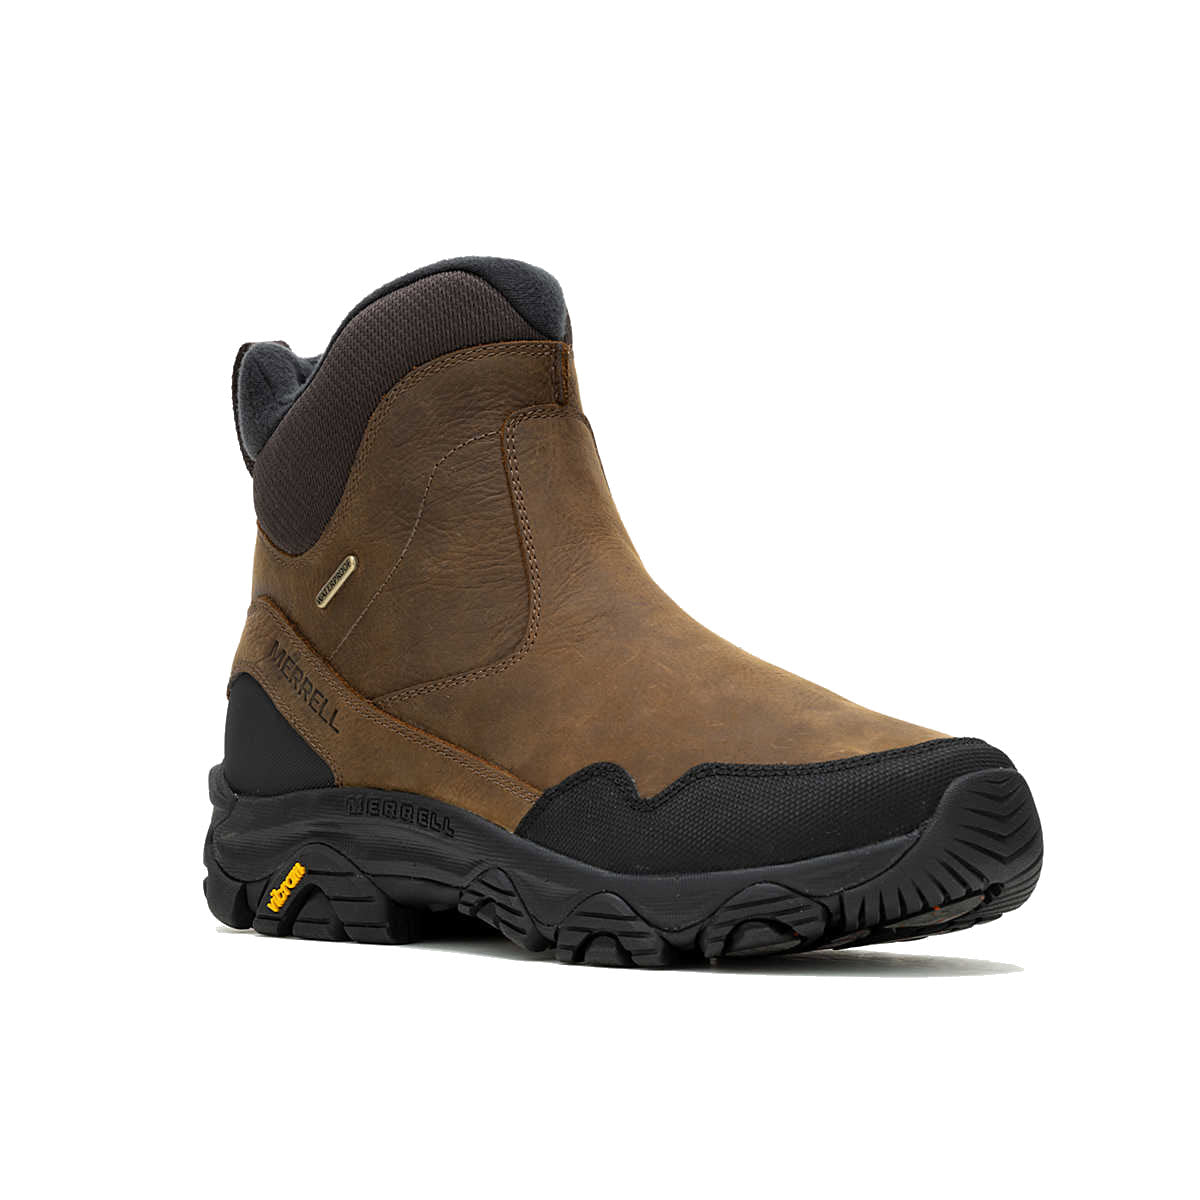 A brown Merrell Coldpack 3 Thermo Tall Zip WP Earth hiking boot with slip-on design and thick black sole, featuring a logo on the side and waterproof construction.